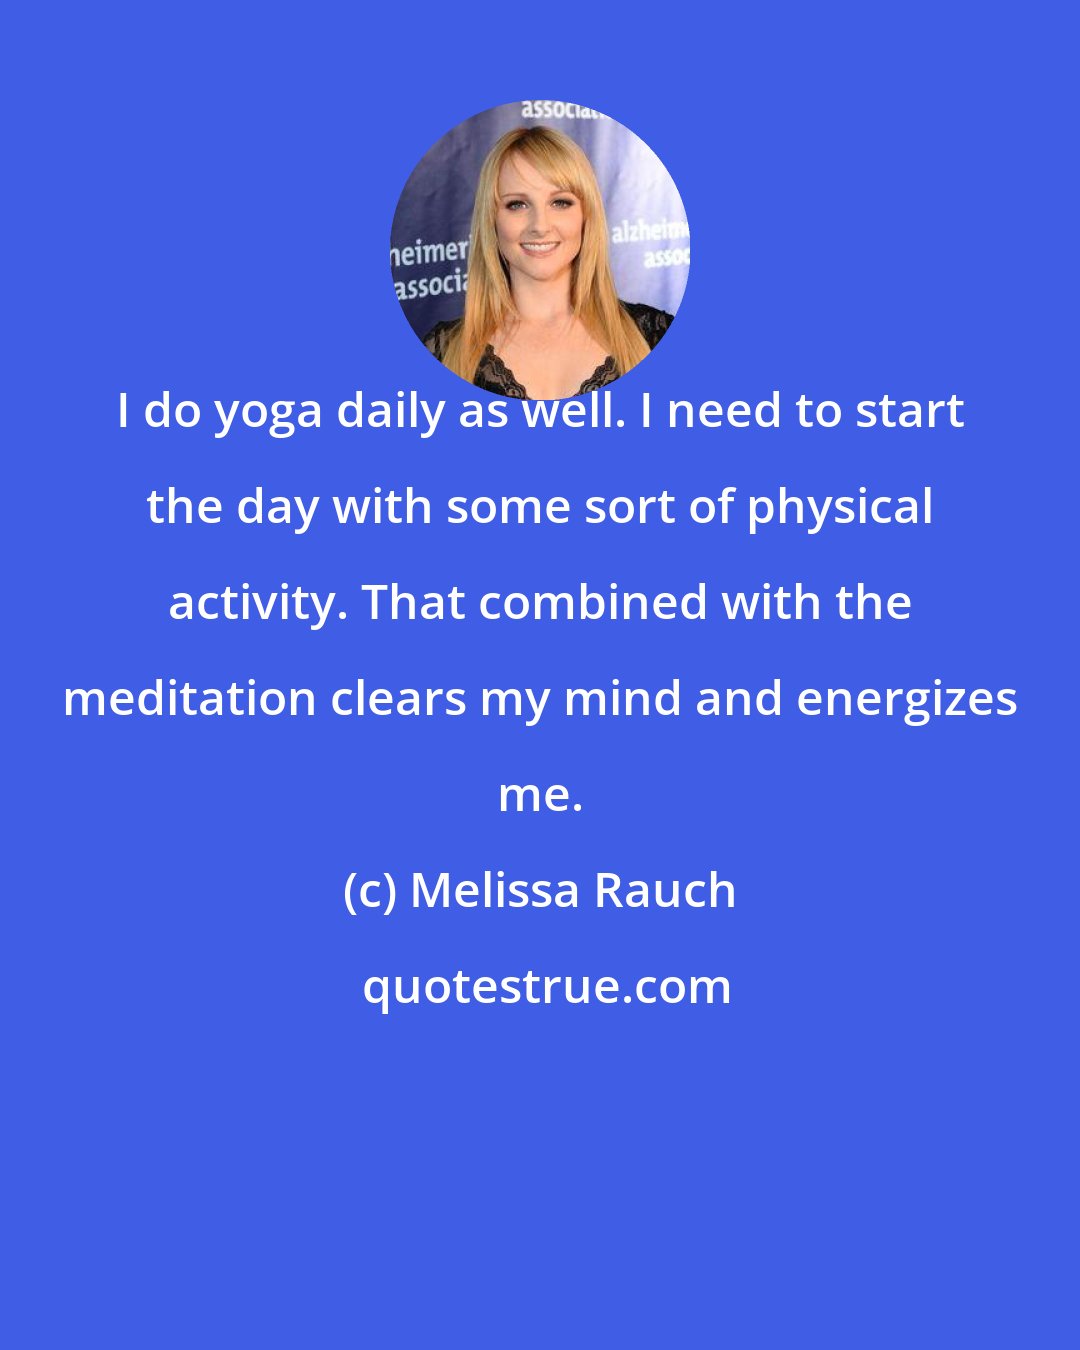 Melissa Rauch: I do yoga daily as well. I need to start the day with some sort of physical activity. That combined with the meditation clears my mind and energizes me.